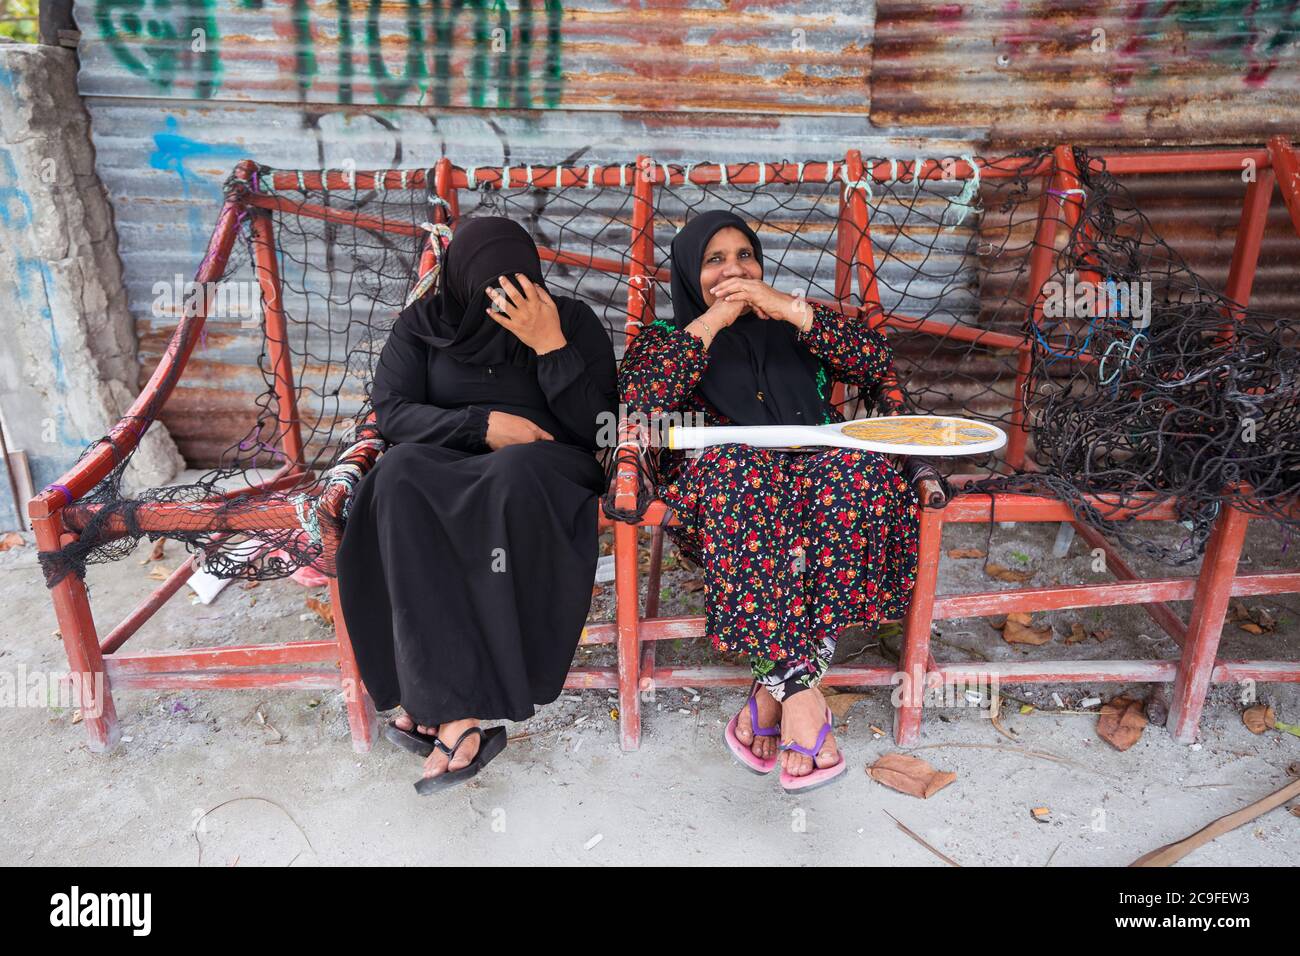 Bodufolhudhoo / Maldives - August 17, 2019: muslim women with black hijab sitting on traditional maldivian bench made with ropes Stock Photo